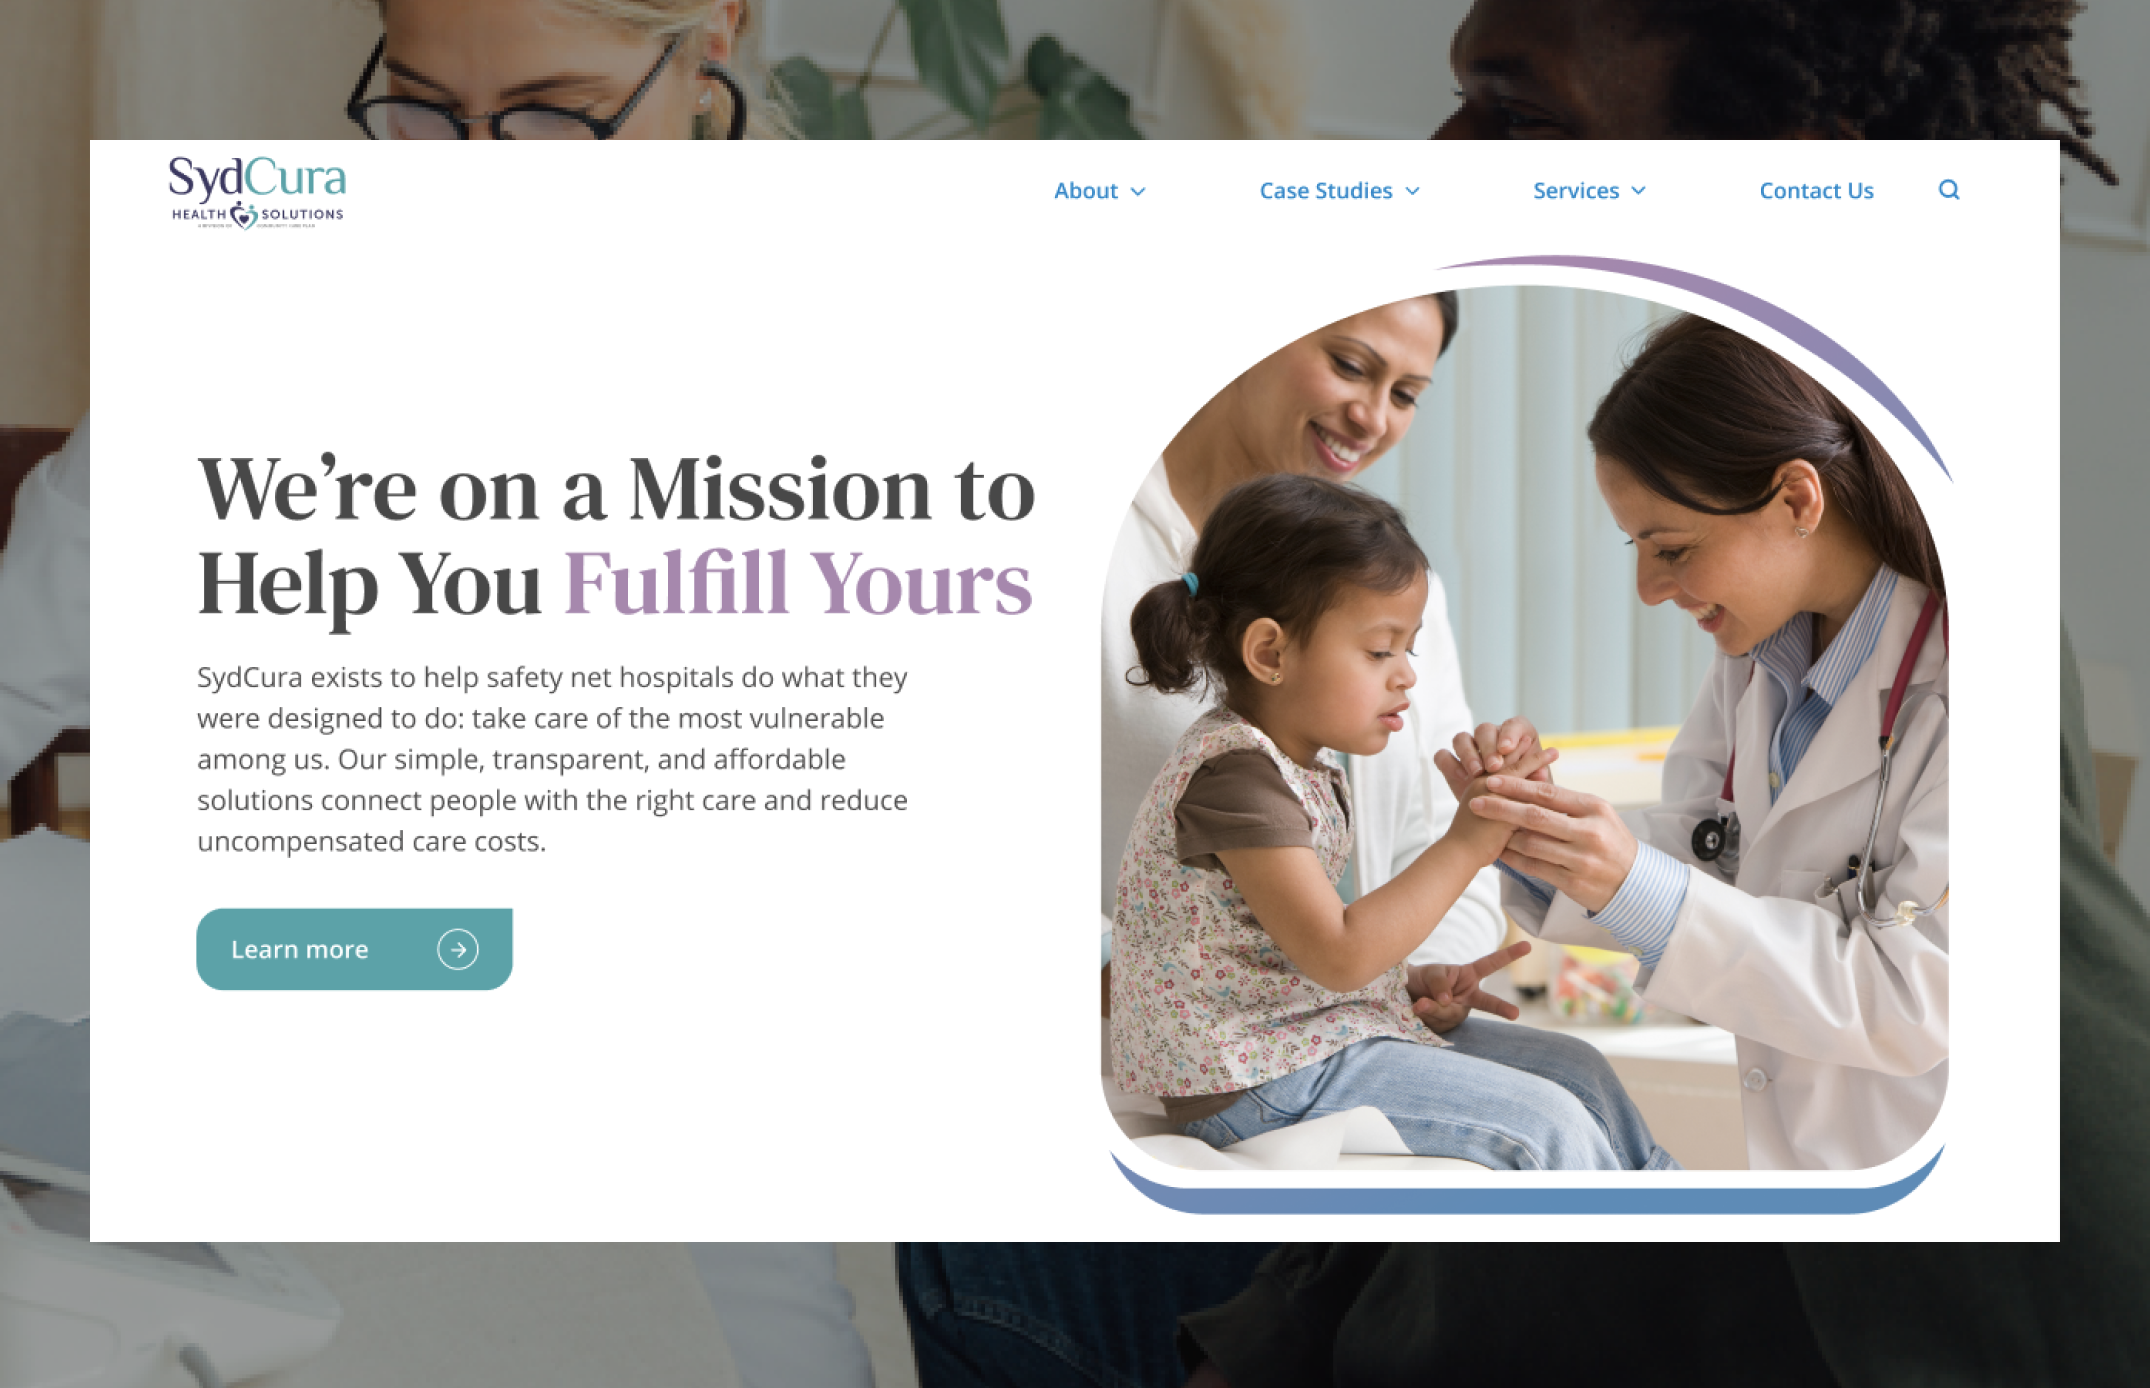 Homepage of the Sydcura website, featuring a picture of a smiling doctor treating a little girl